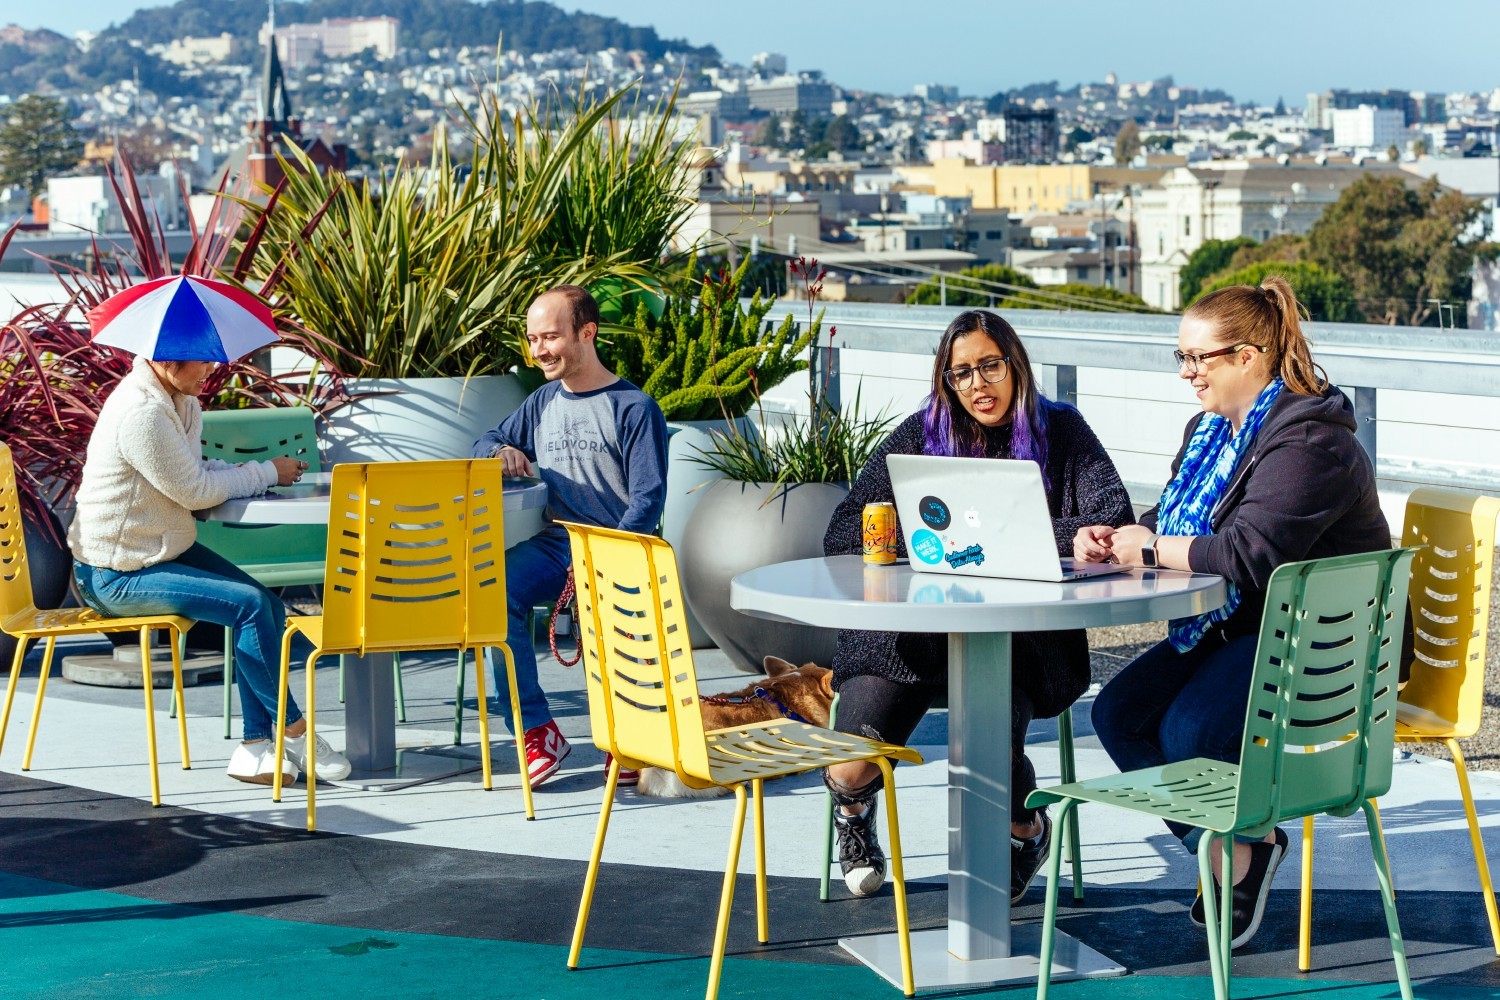 NextRoll's San Francisco headquarters boasts a rooftop patio where Rollers can work and hang out with coworkers. 